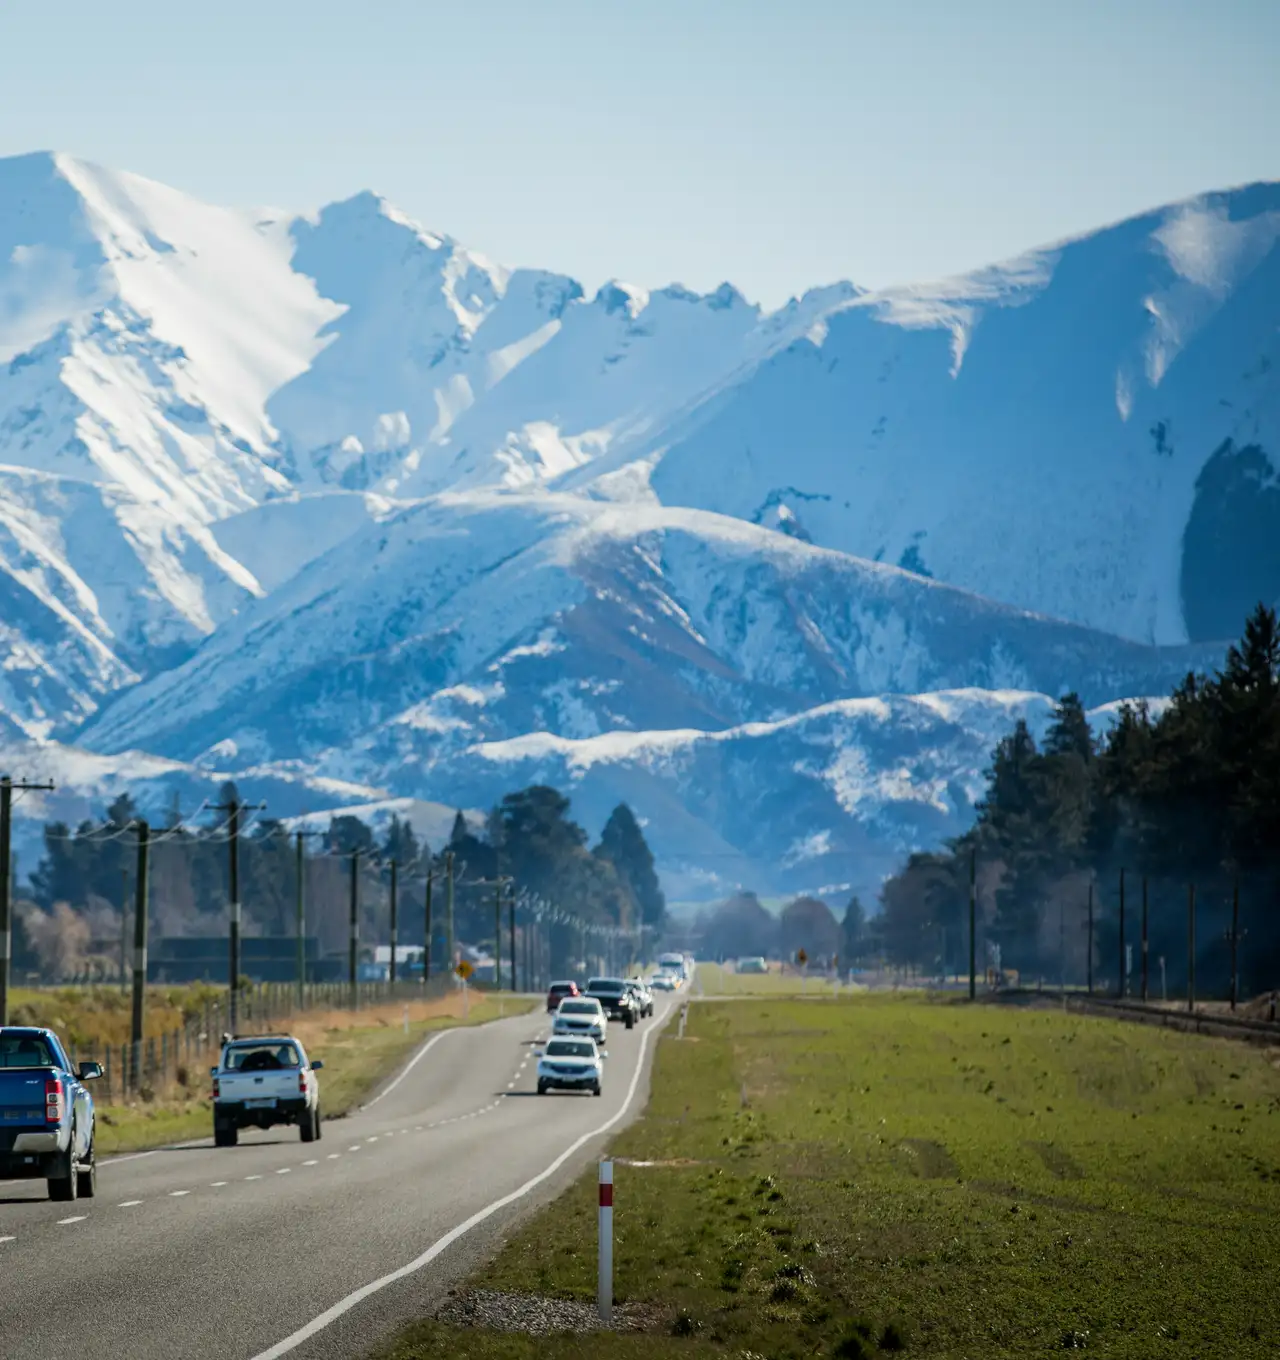 Cars driving along a road with snow covered mountains in the background